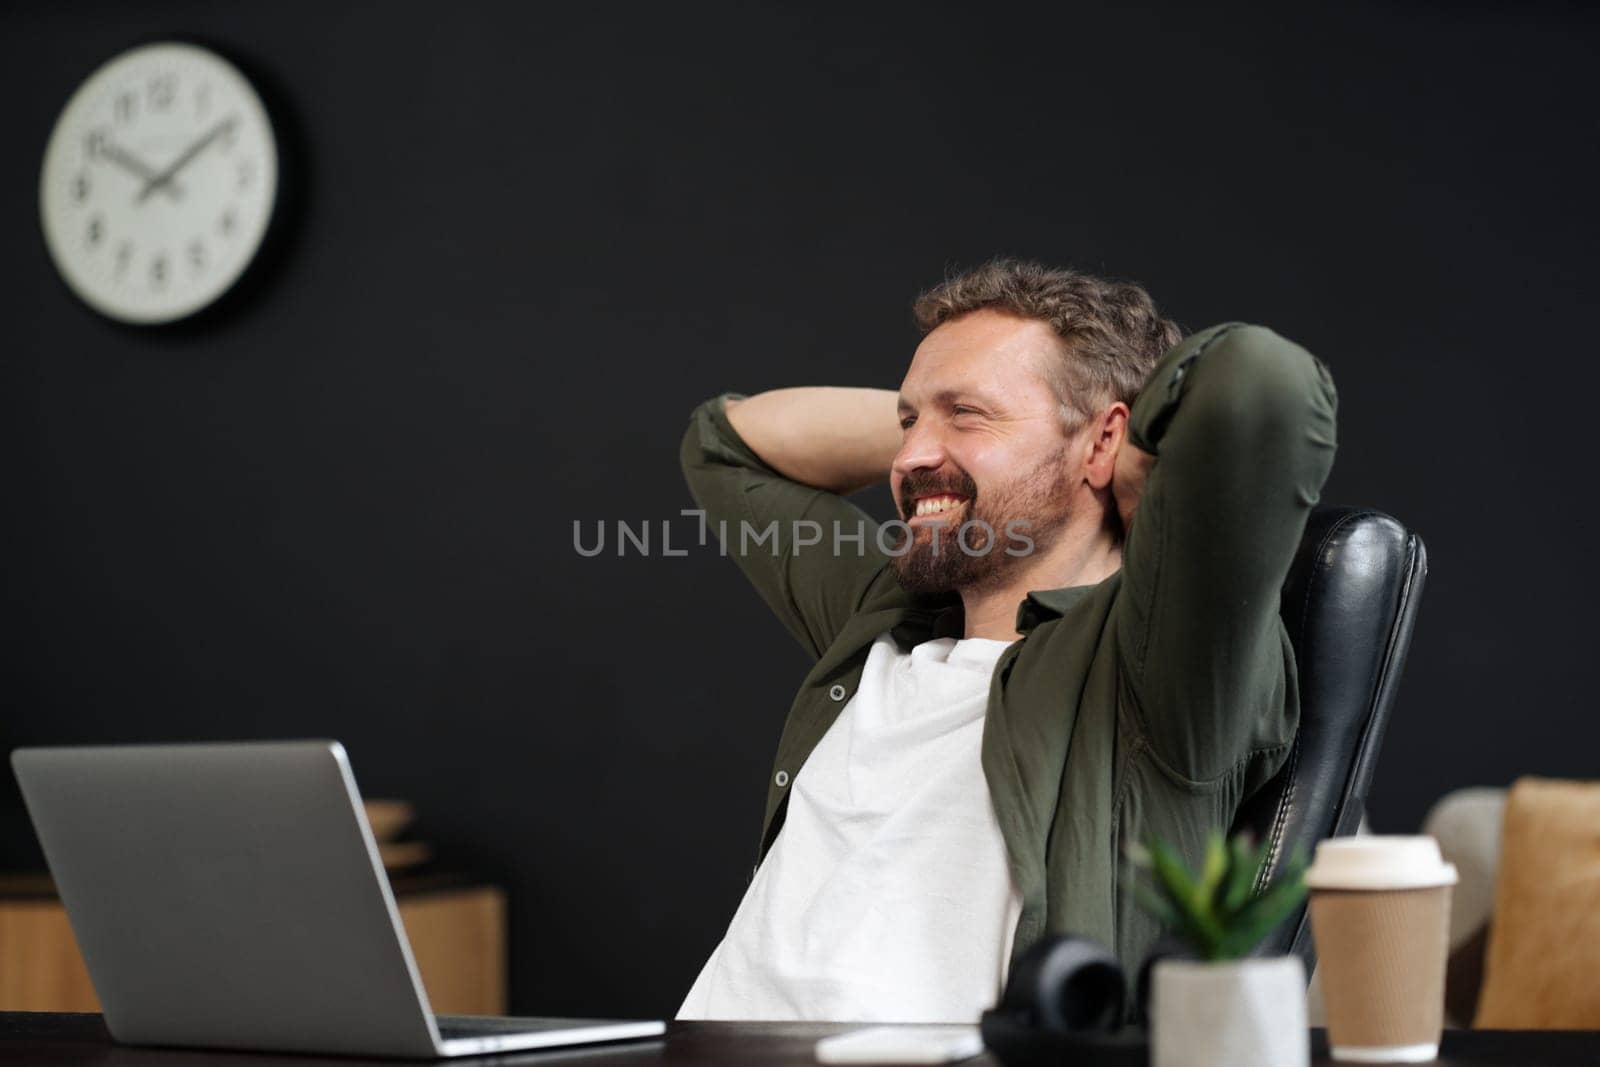 Happy and smiling man taking break and relaxing in office chair. He working on laptop, while enjoying cup of coffee. Modern and productive workplace, with a focus on technology and communication. High quality photo